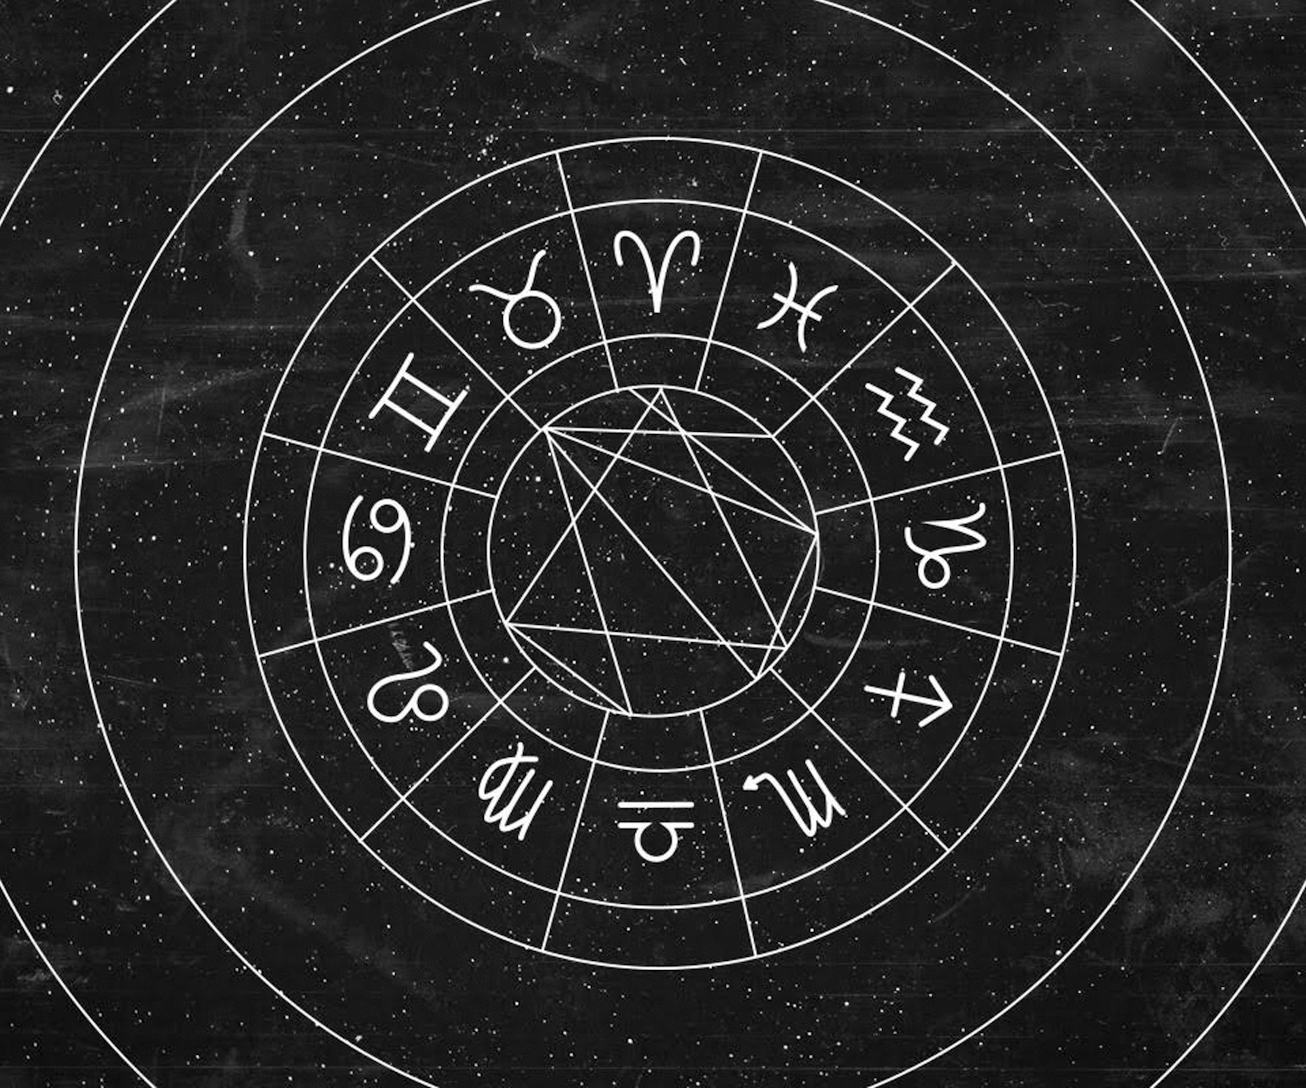 Zodiac chart with all twelve signs on it, and black sky full of stars behind it.